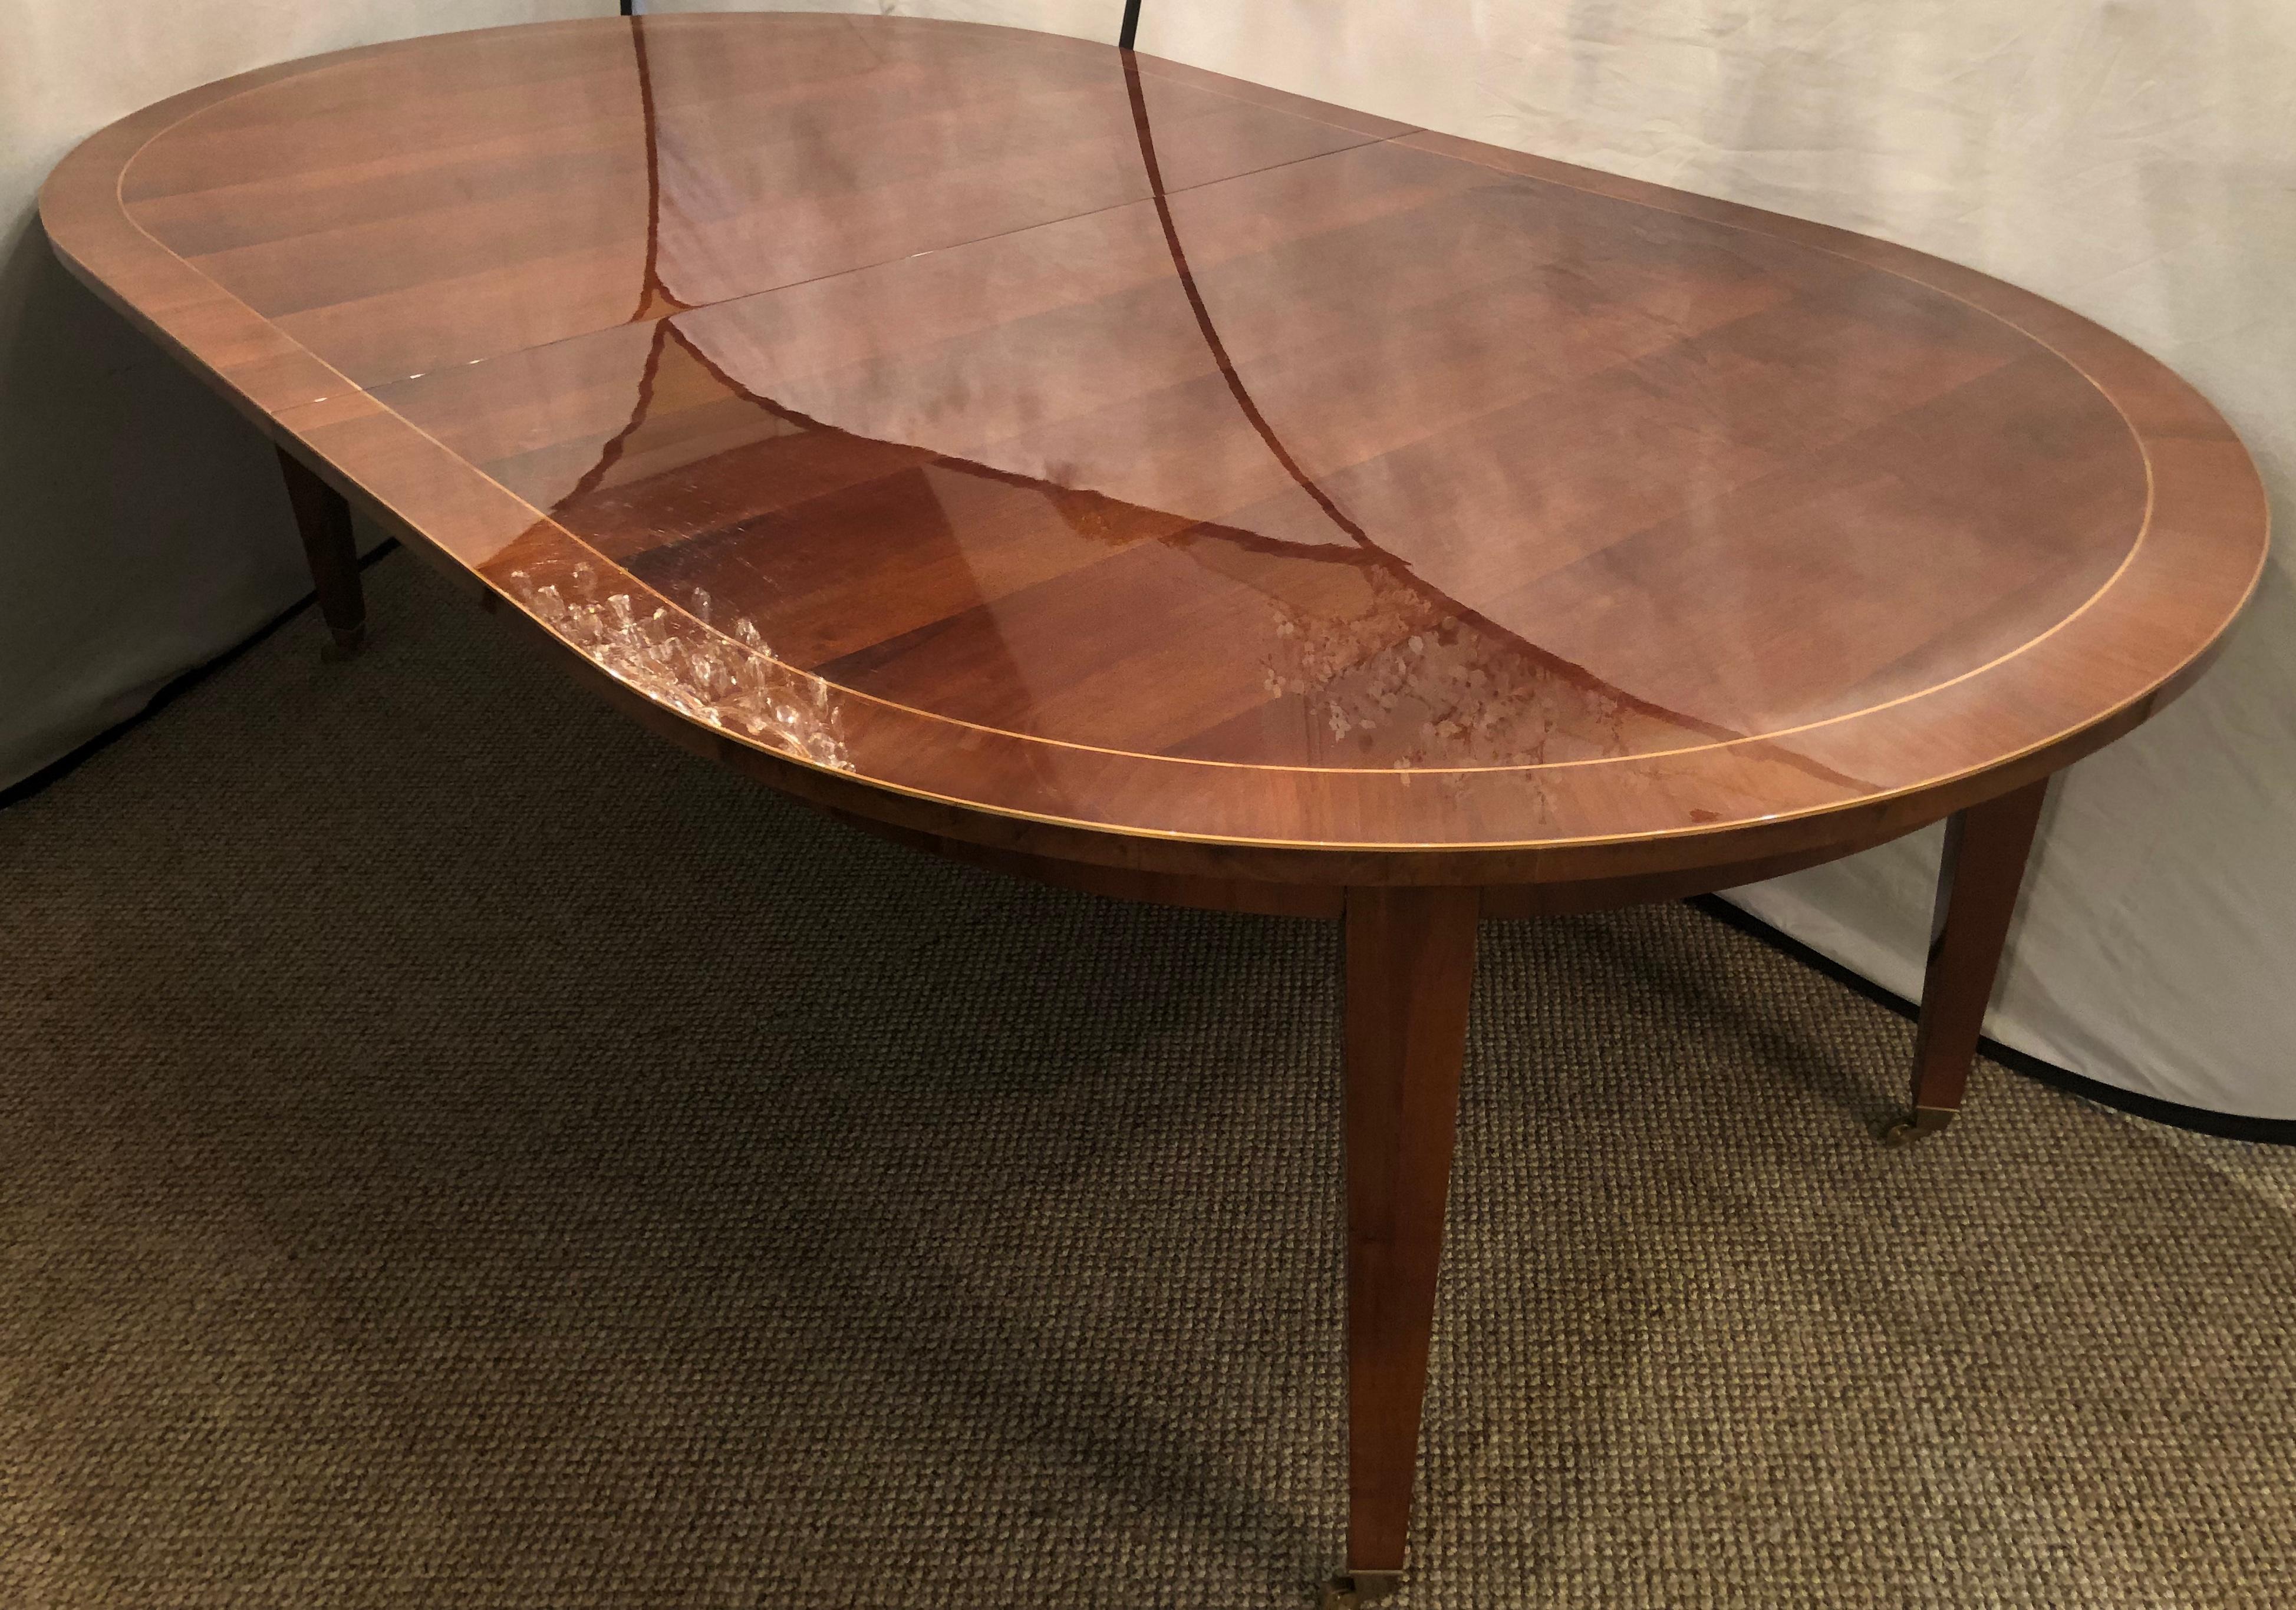 A Maison Jansen inspired dining table by Iliad Design. This Fine 54 inch wide custom made flame mahogany neoclassical dining table having one 24 inch leaf was purchased directly from Iliad Design for over thirty thousand dollars by the current